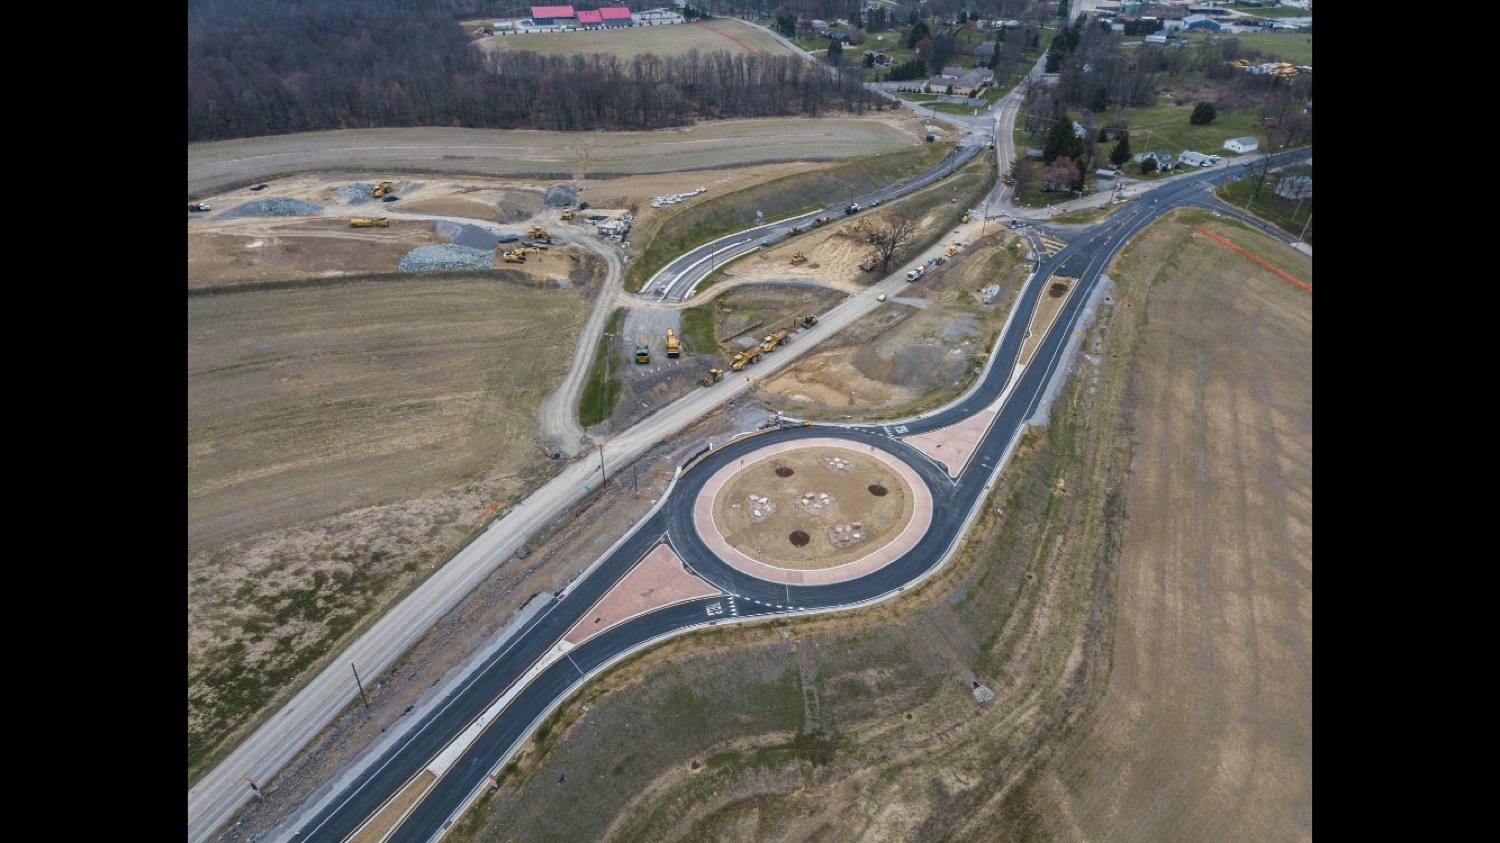 Route 228 and SR 2005 (Saxonburg Blvd.)<br><a href="https://filesource.amperwave.net/commonwealthofpa/photo/22209_dot_roundabout_photo_13.jpg" target="_blank">⇣ Download Photo</a>